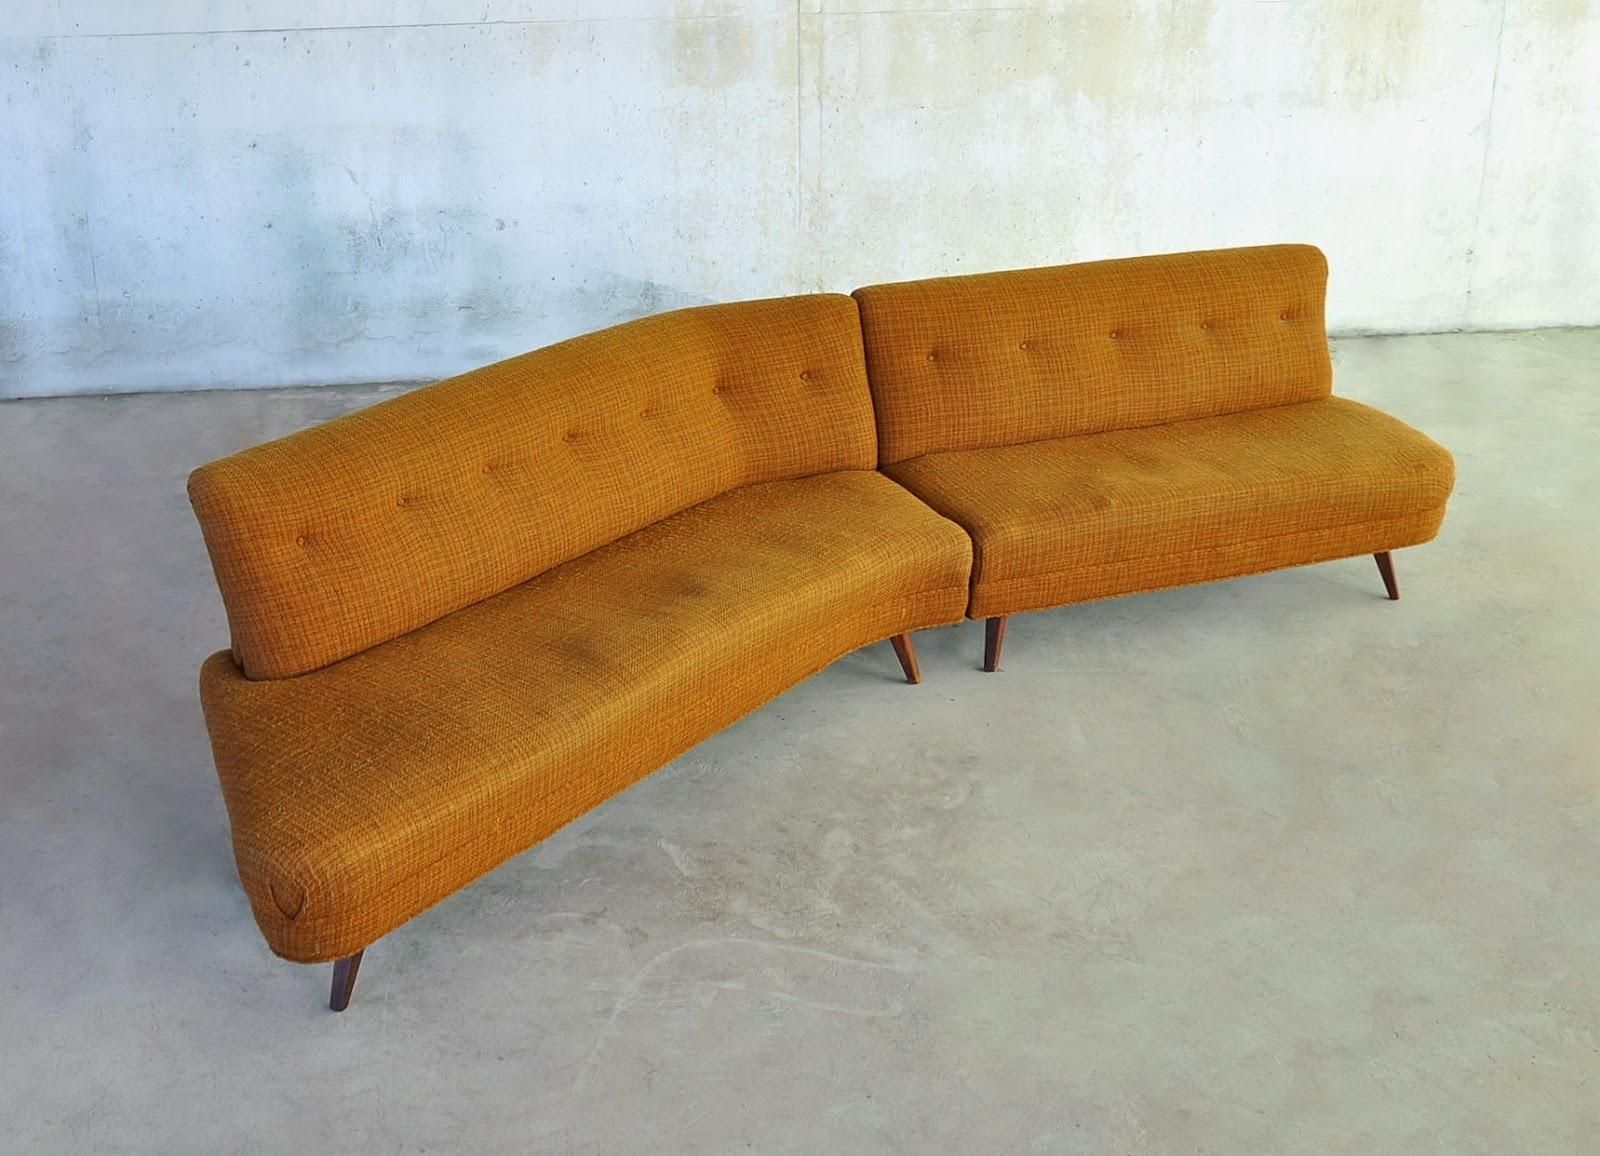 Vintage Mid Century Modern Sectional Sofa : Mid Century Modern In Mid Century Modern Sectional (View 19 of 20)